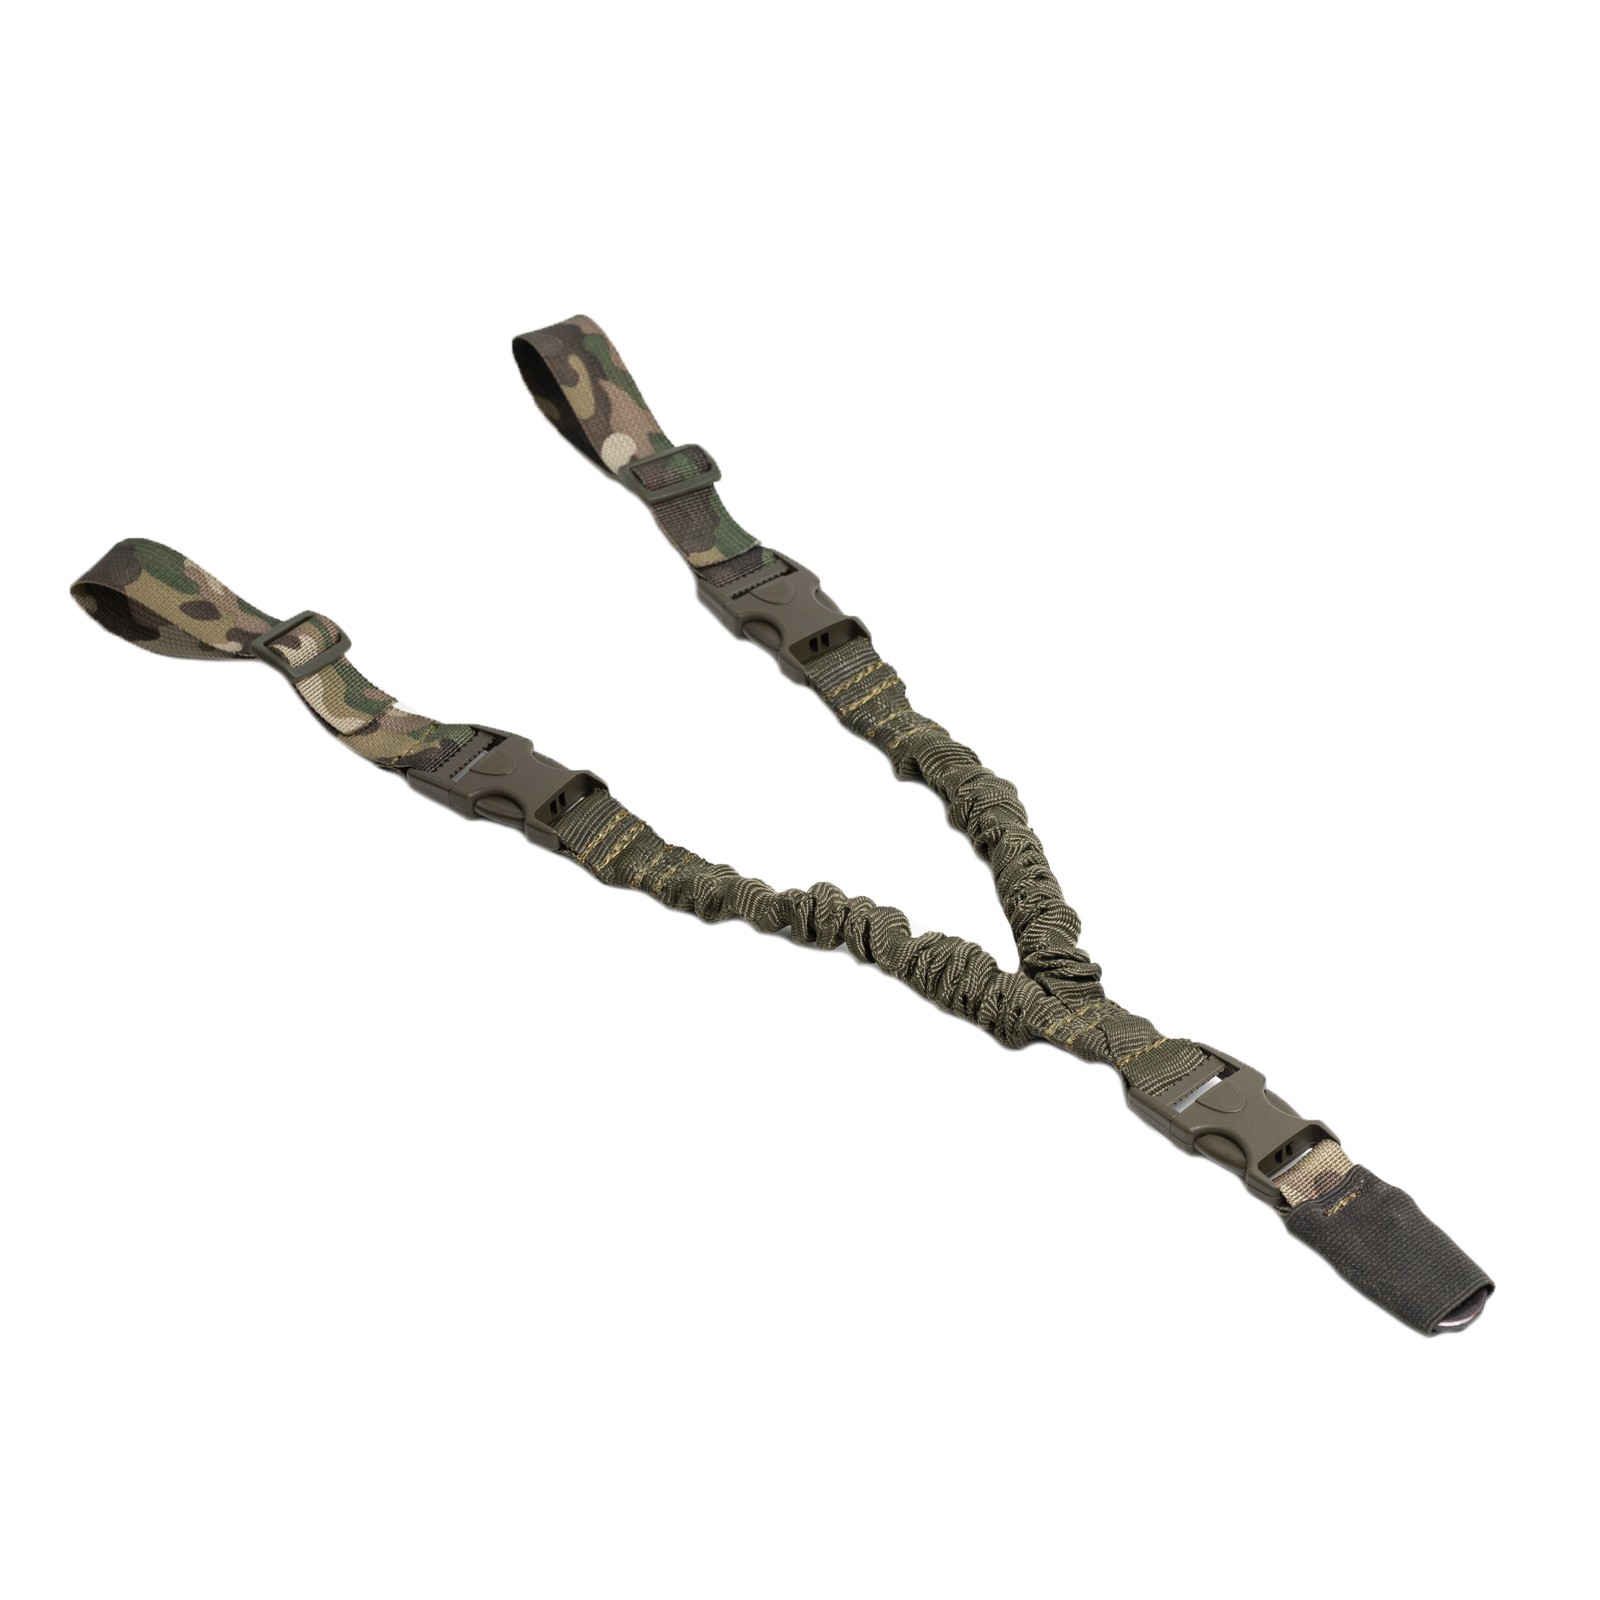 1 point sling with elastic multicam straps